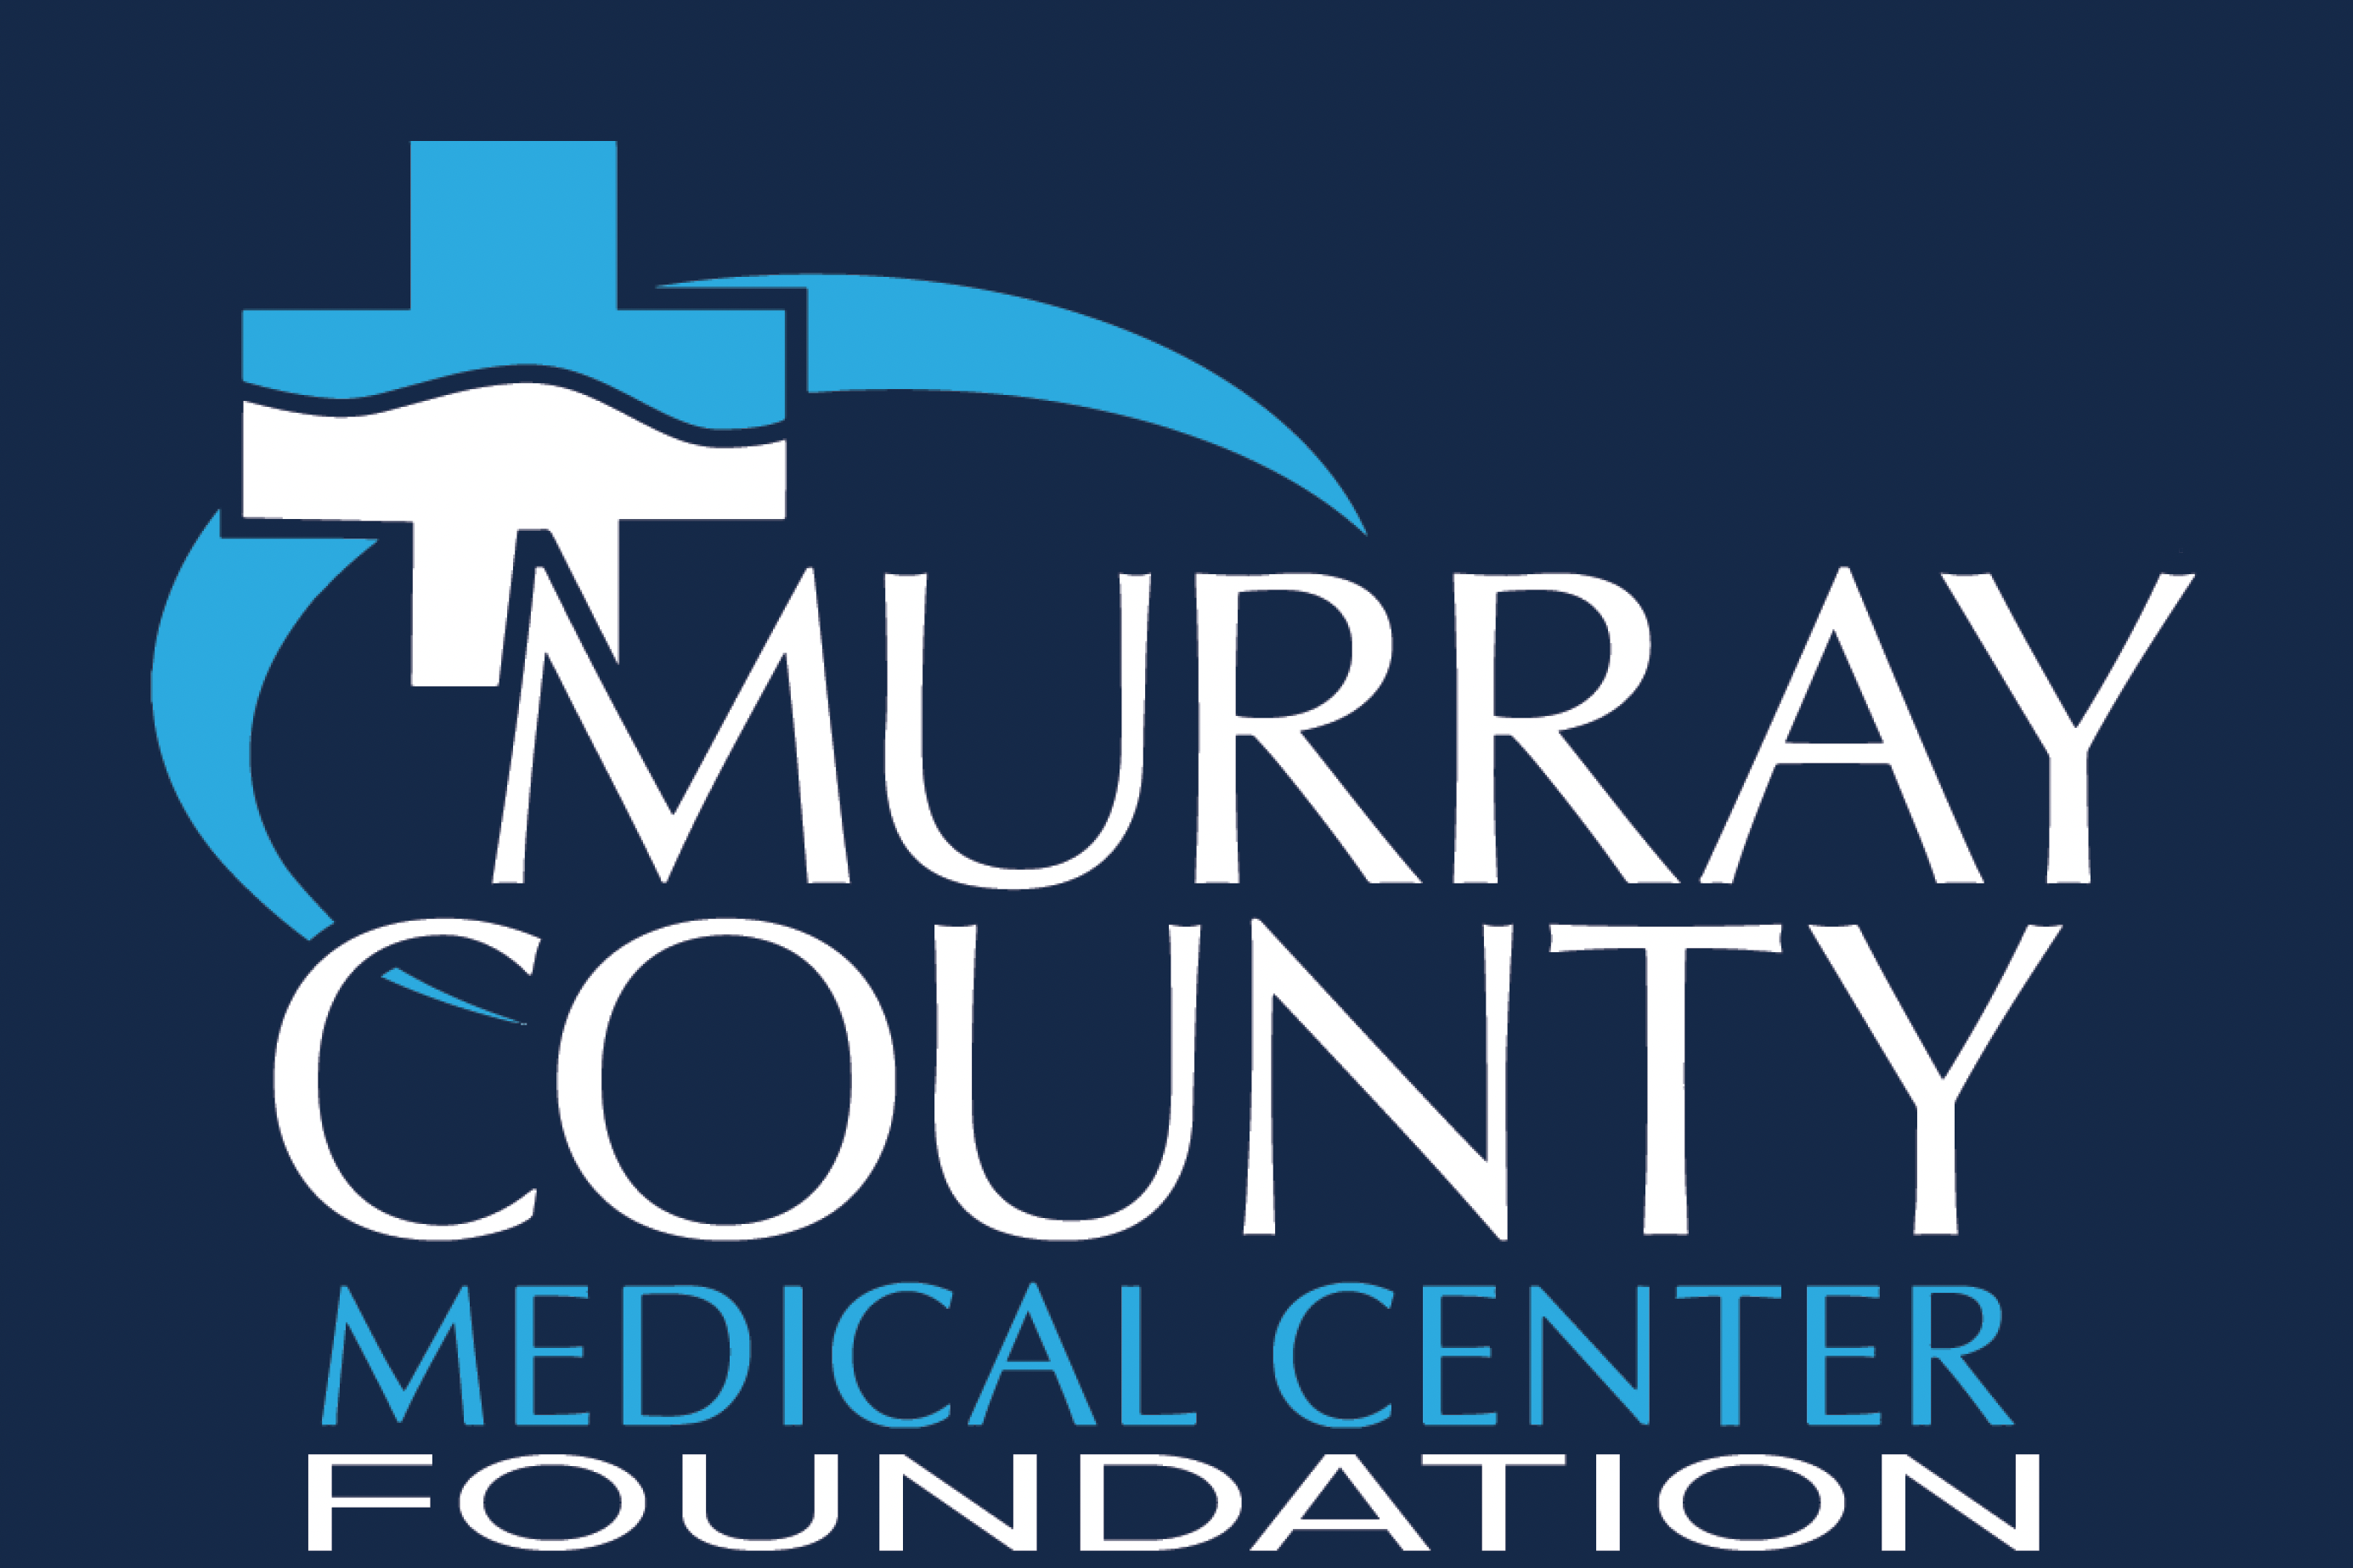 The Murray County Medical Center Foundation